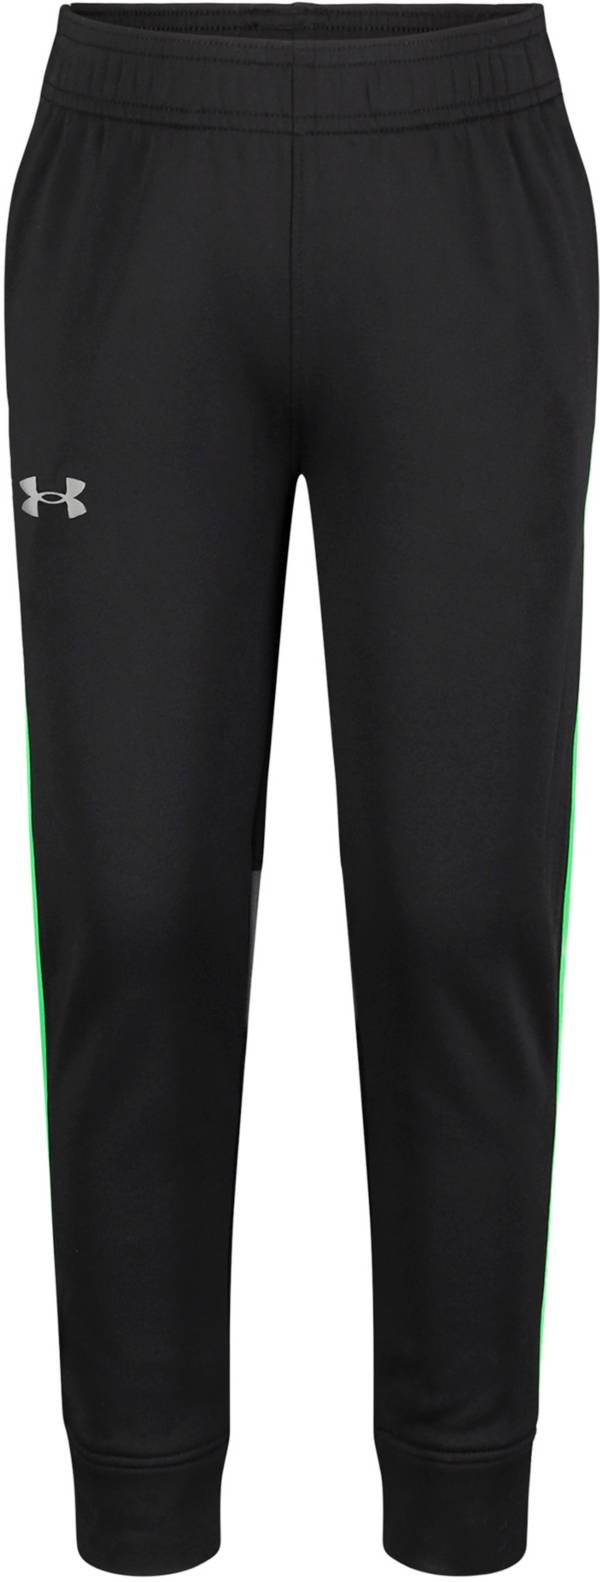 Under Armour Toddler Boys' Light It Up Joggers product image